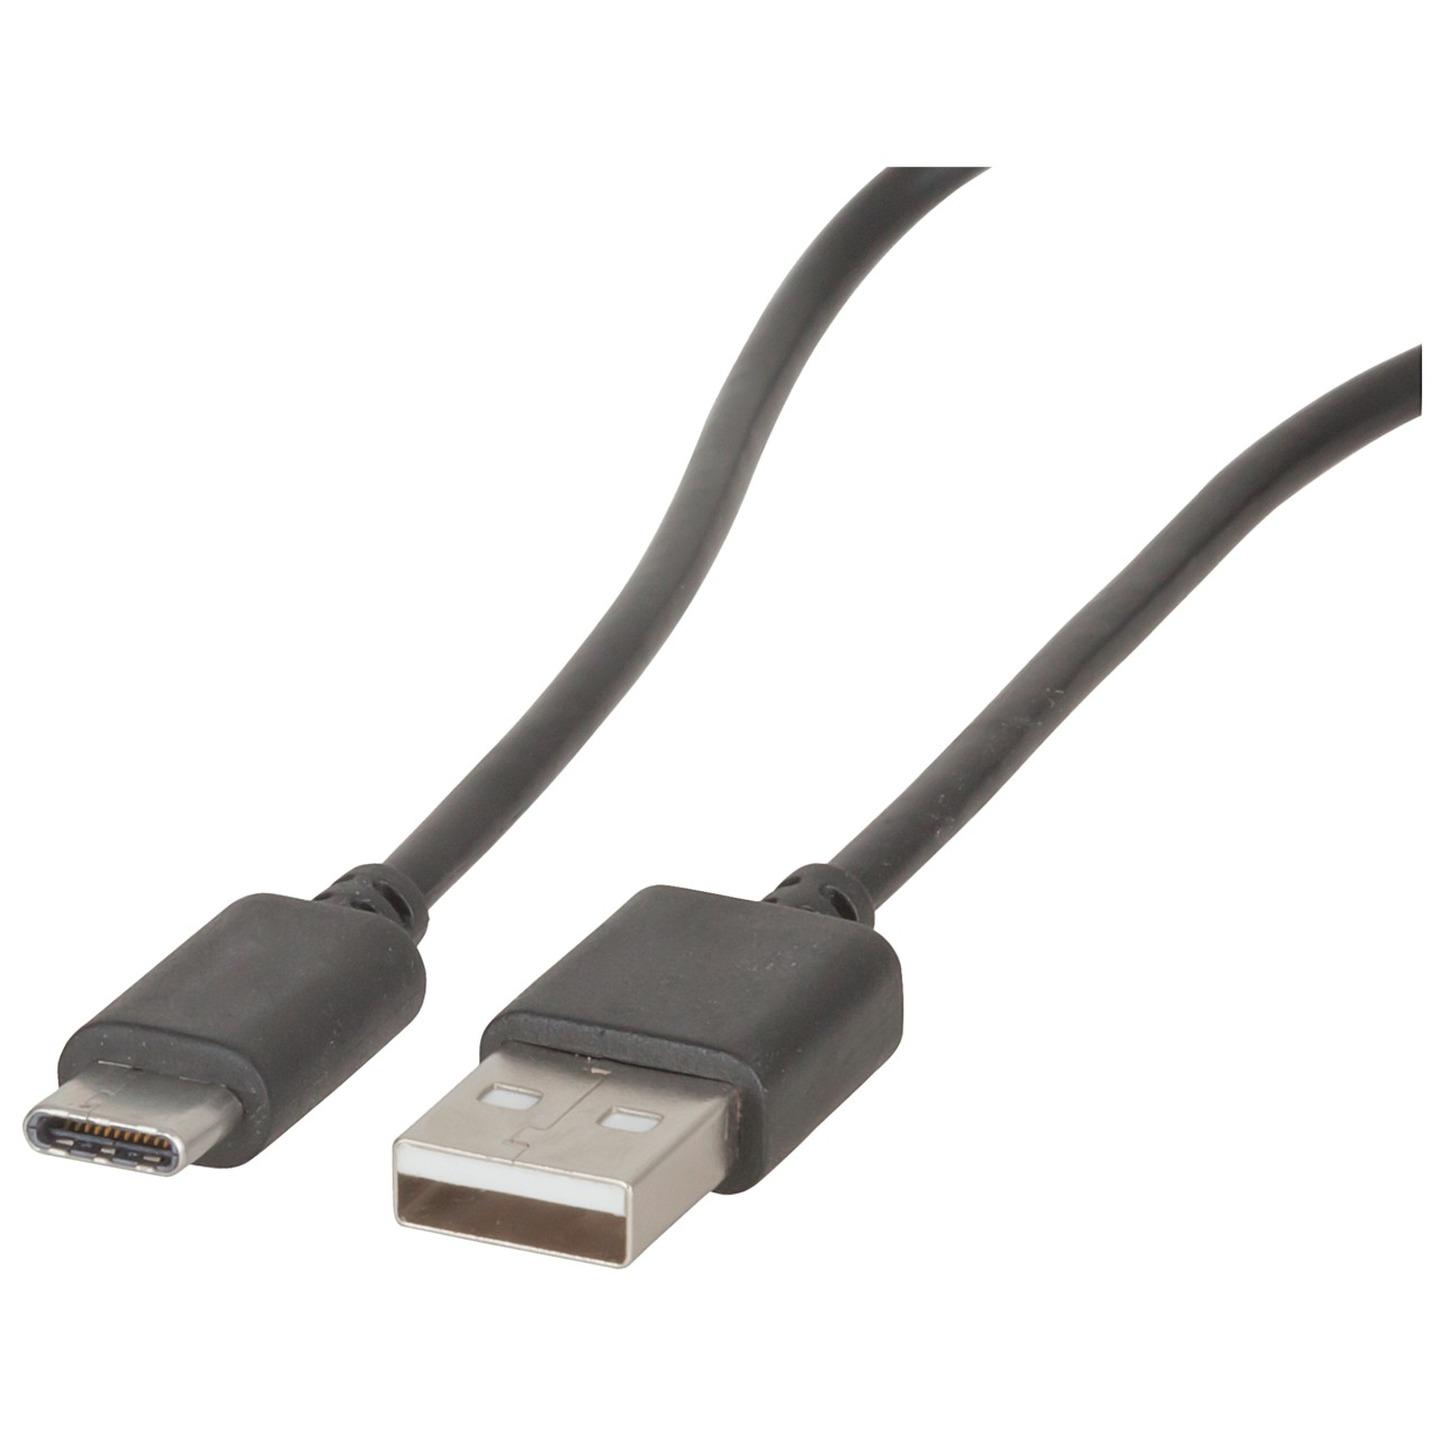 USB Type-C to USB 2.0 A Male Cable 1.8m